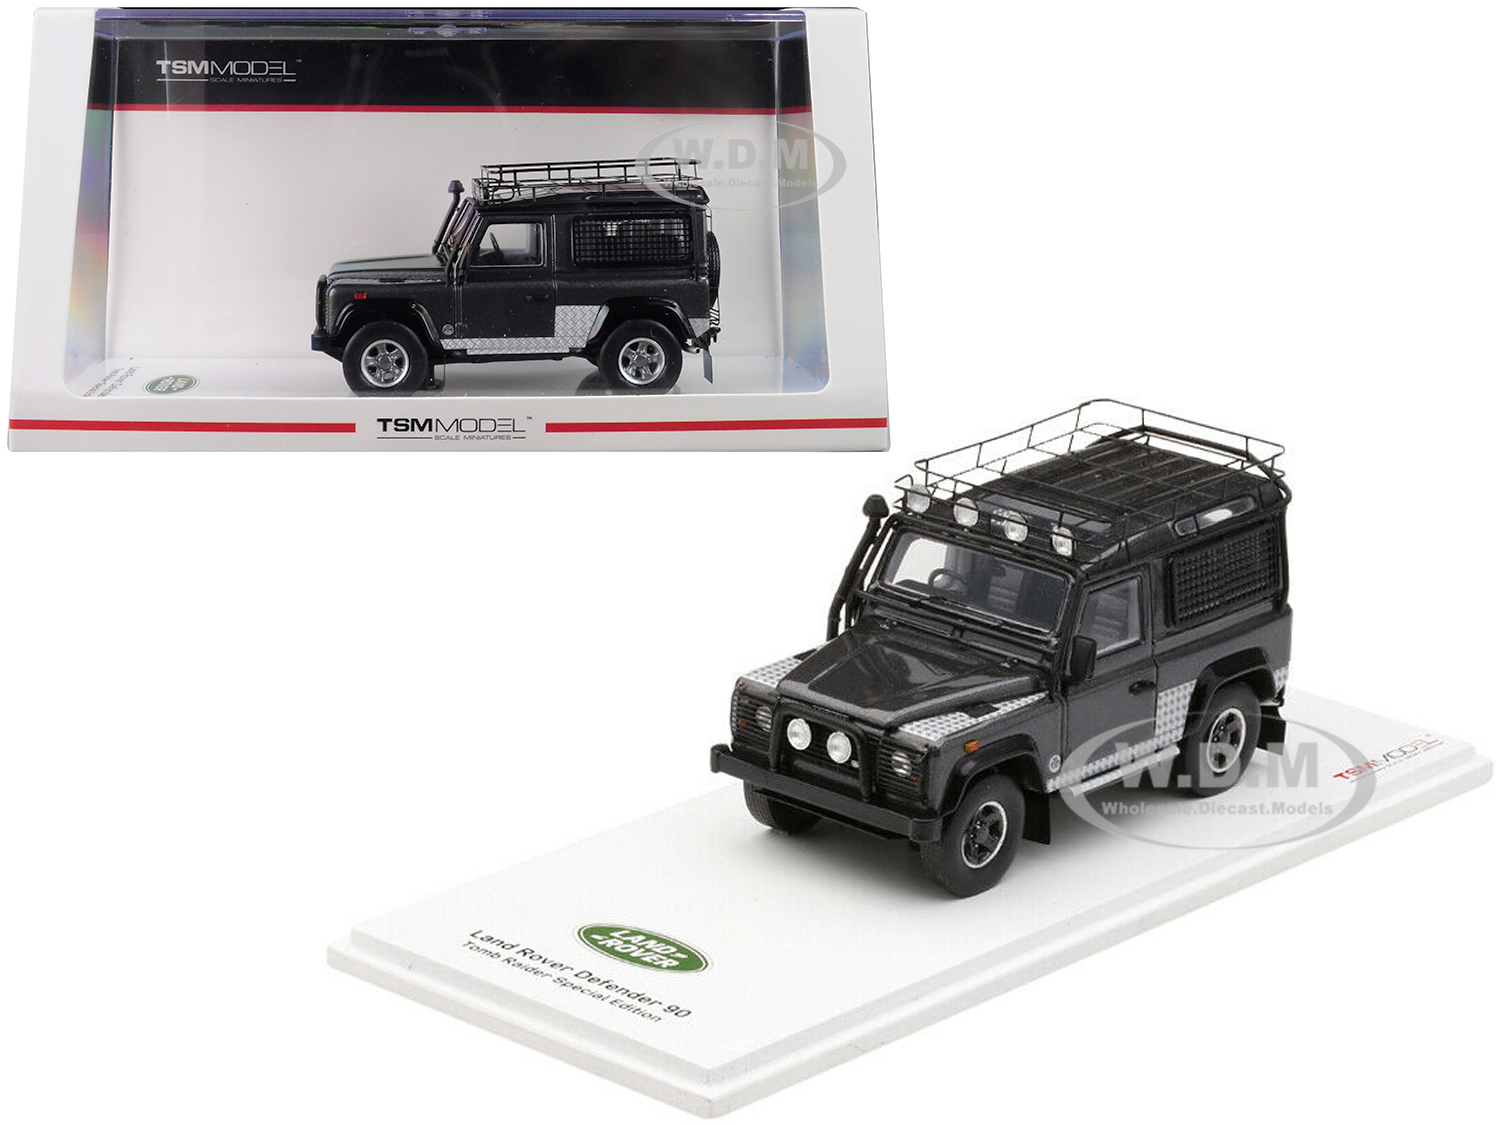 Land Rover Defender 90 Dark Gray "tomb Raider Special Edition" 1/43 Model Car By True Scale Miniatures